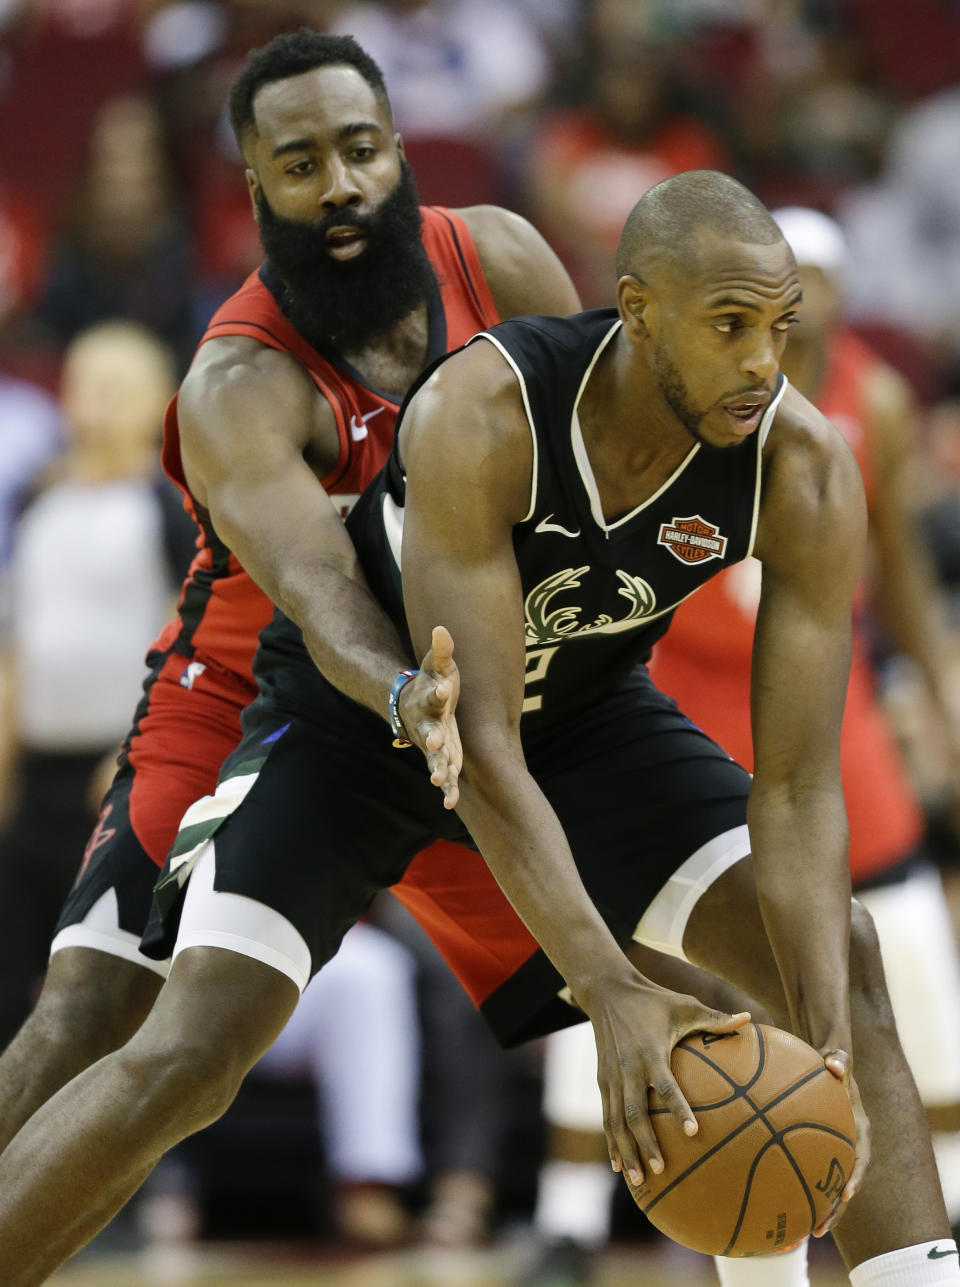 Milwaukee Bucks forward Khris Middleton, right, looks to pass as Houston Rockets guard James Harden defends during the first half of an NBA basketball game Thursday, Oct. 24, 2019, in Houston. (AP Photo/Eric Christian Smith)